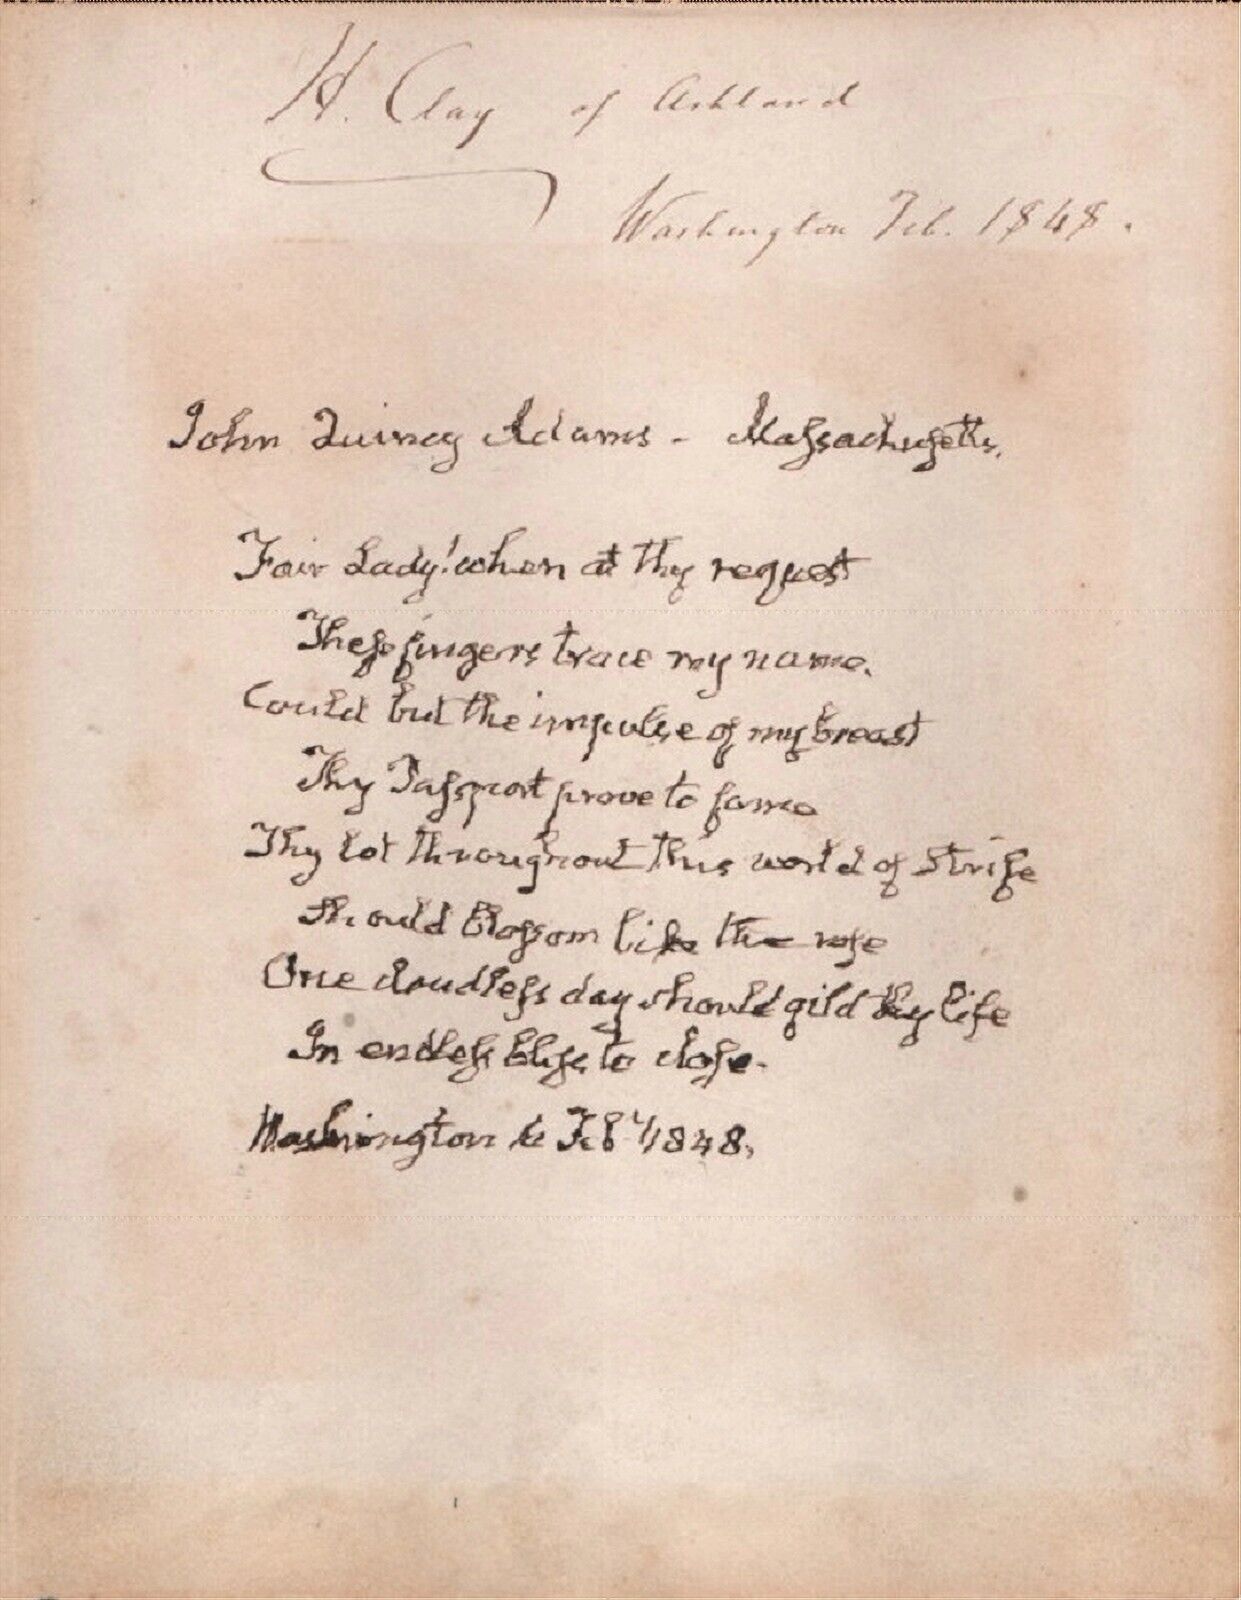 John Q. Adams  poem days before death.  One of his last autographs, Also w-Cay